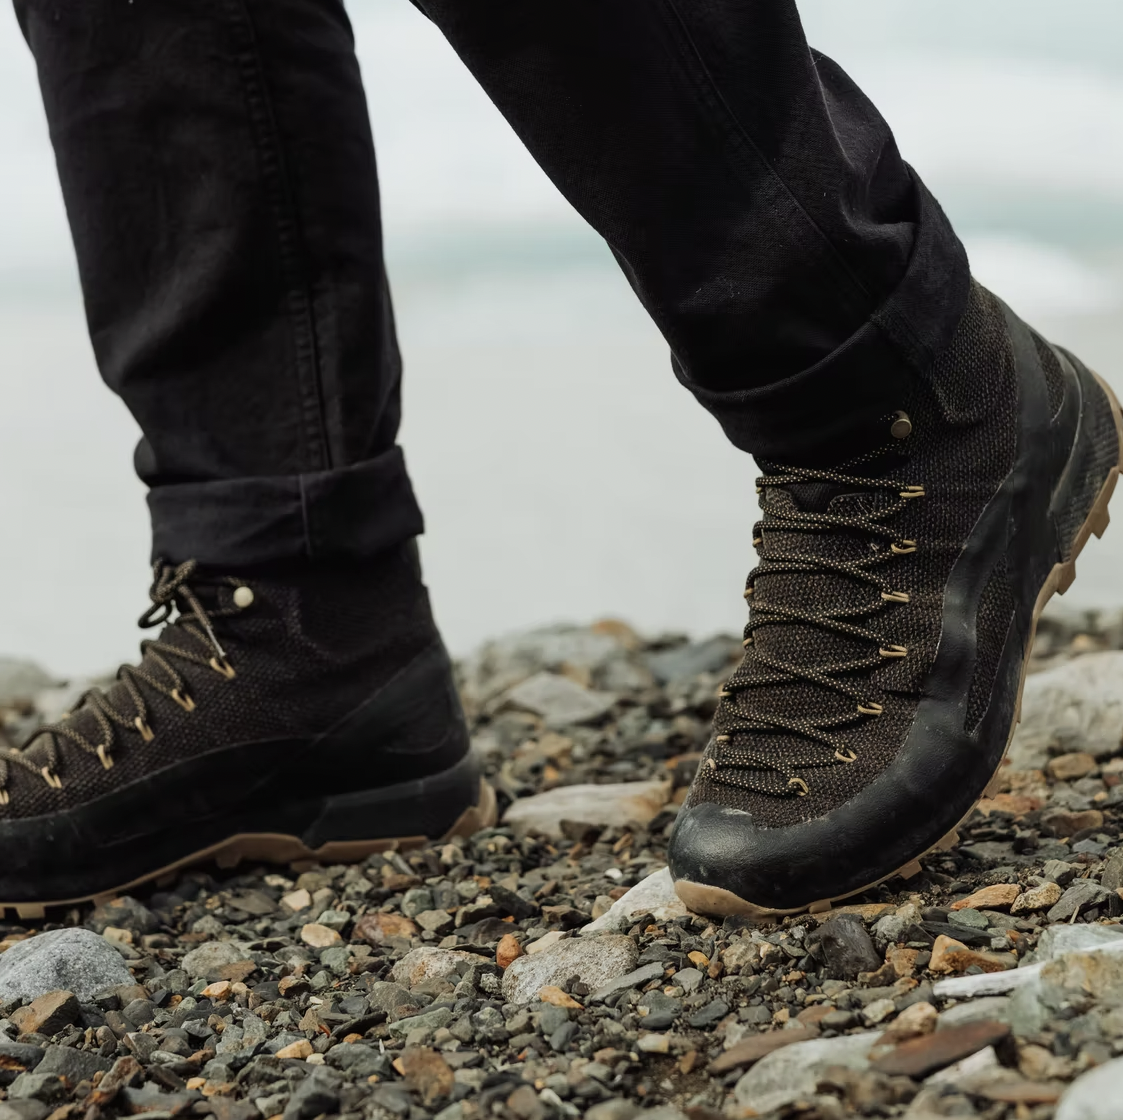 These Coveted Kevlar Hiking Boots Are 25% Off at Huckberry